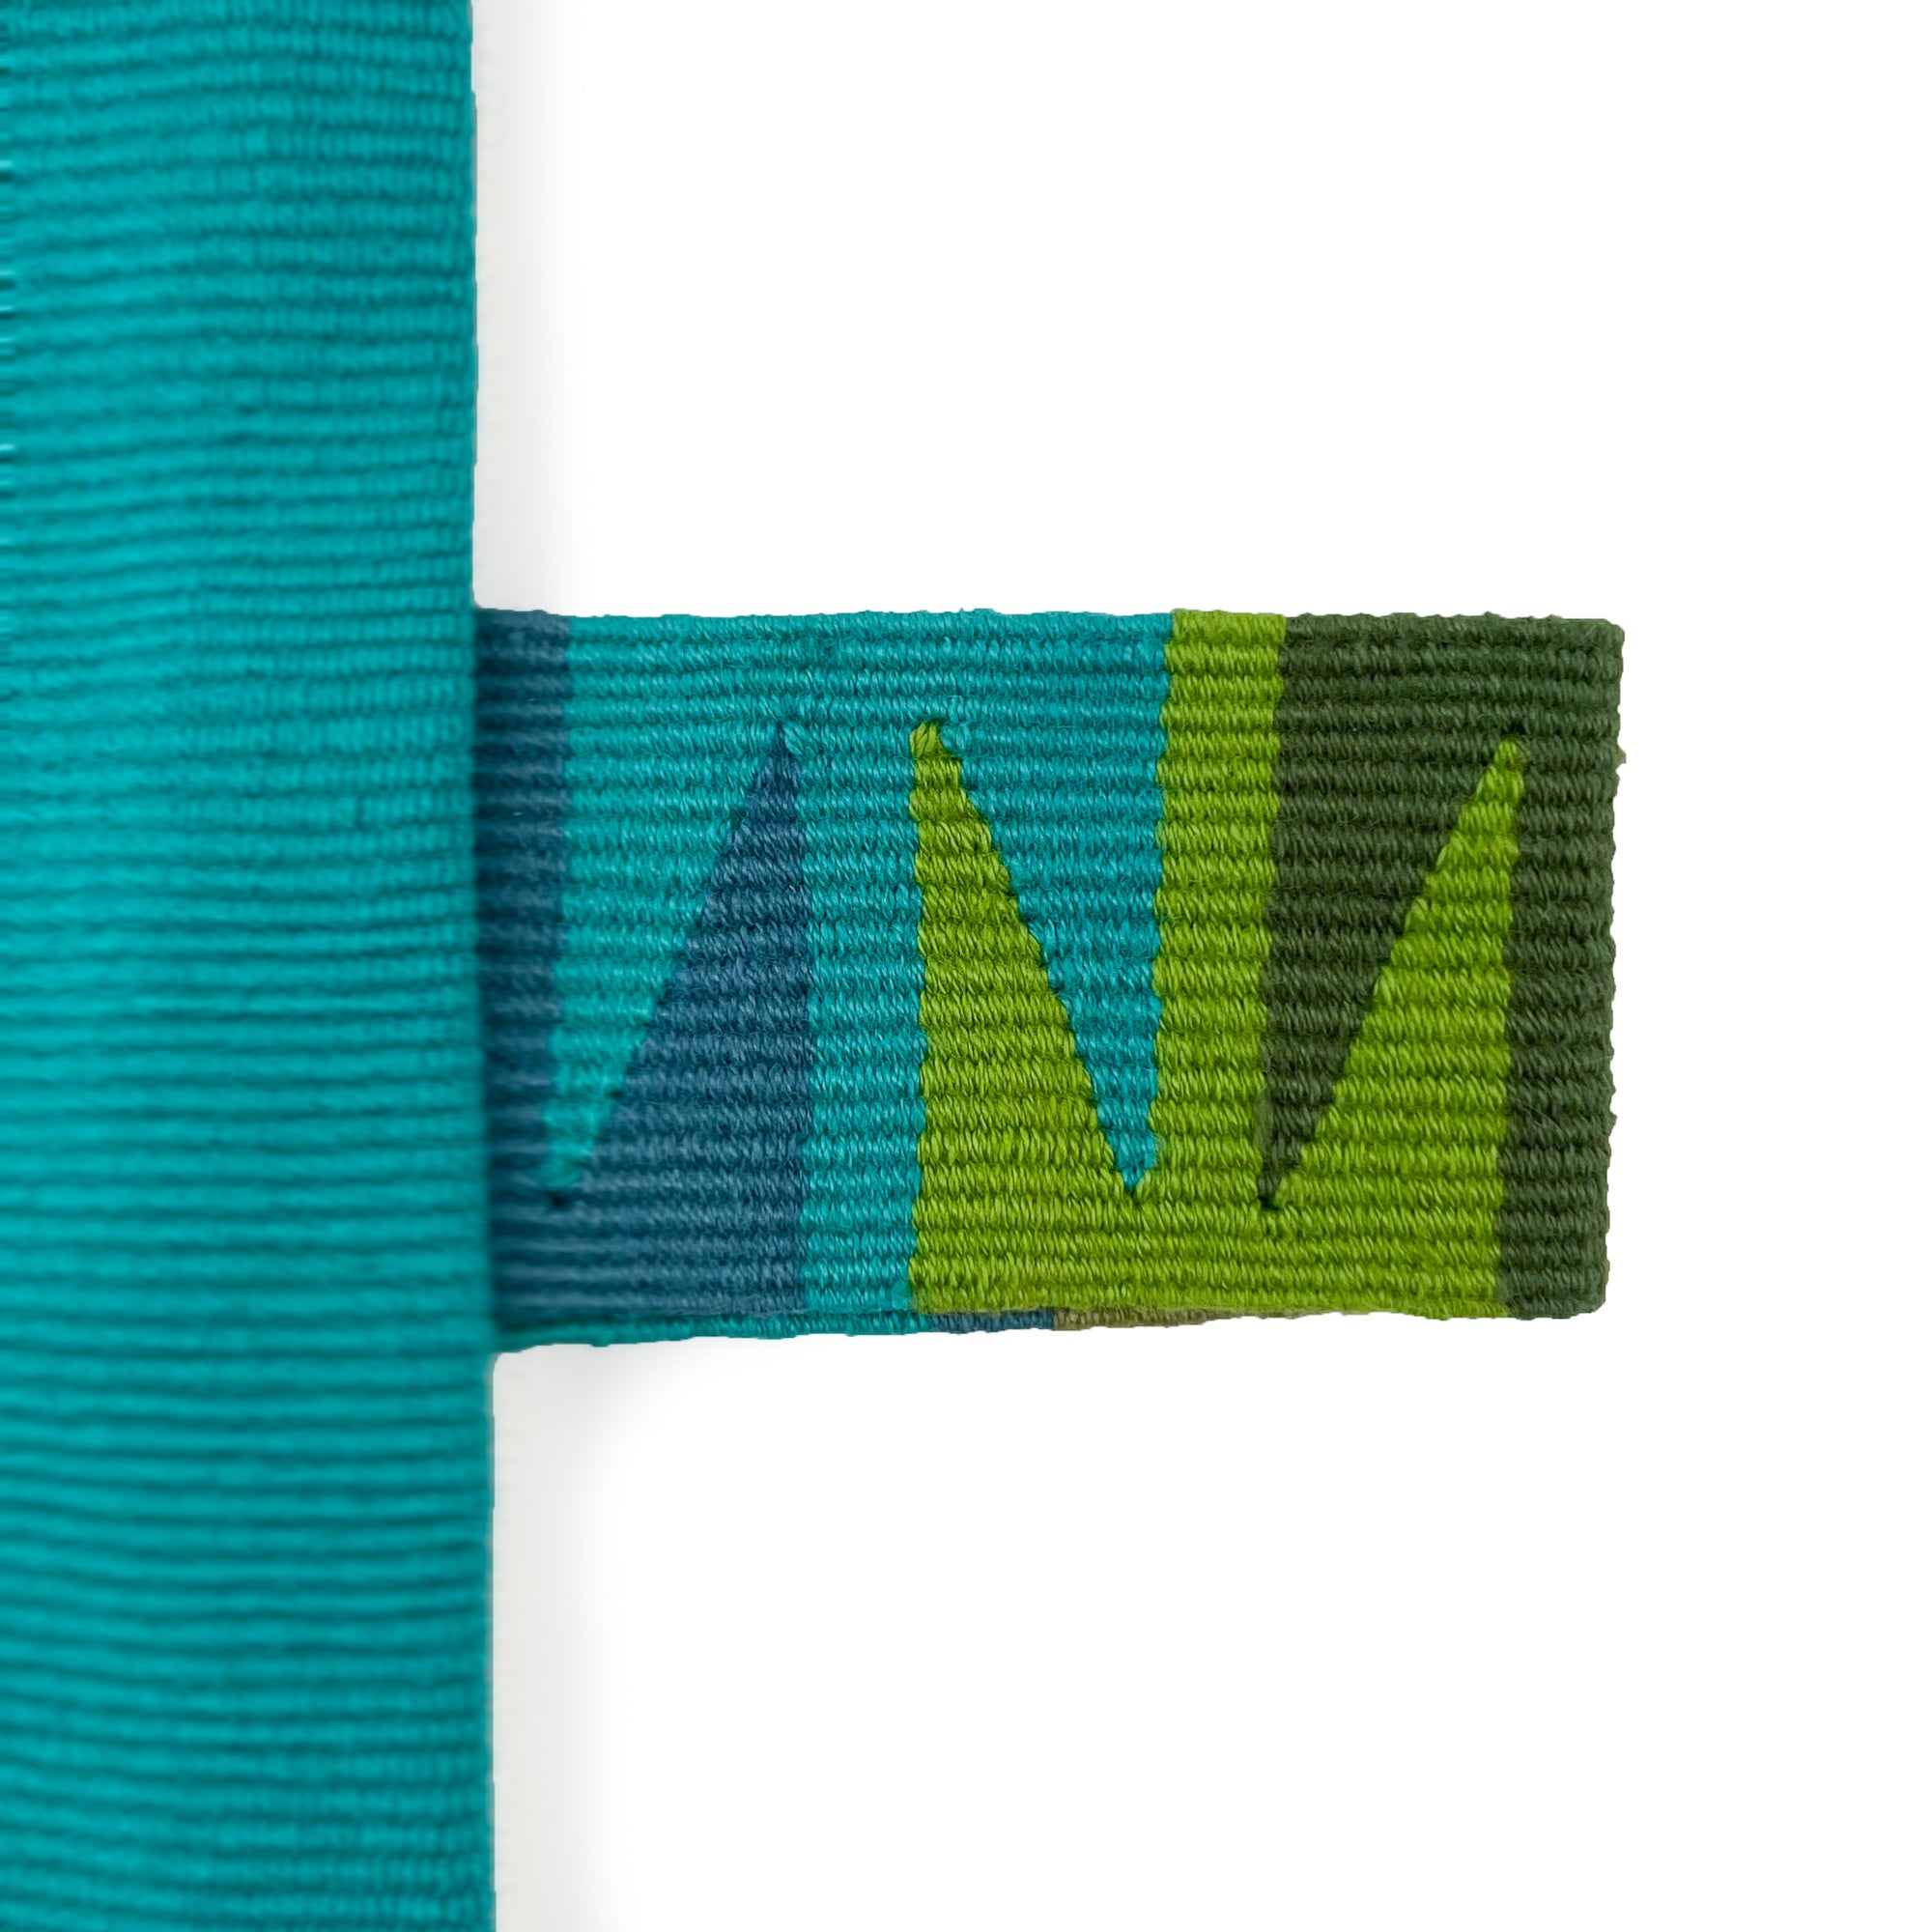 Front of rectangular cushion with color block panels in turquoise, green with black and white randa detail, and teal, with colorful cinta tag